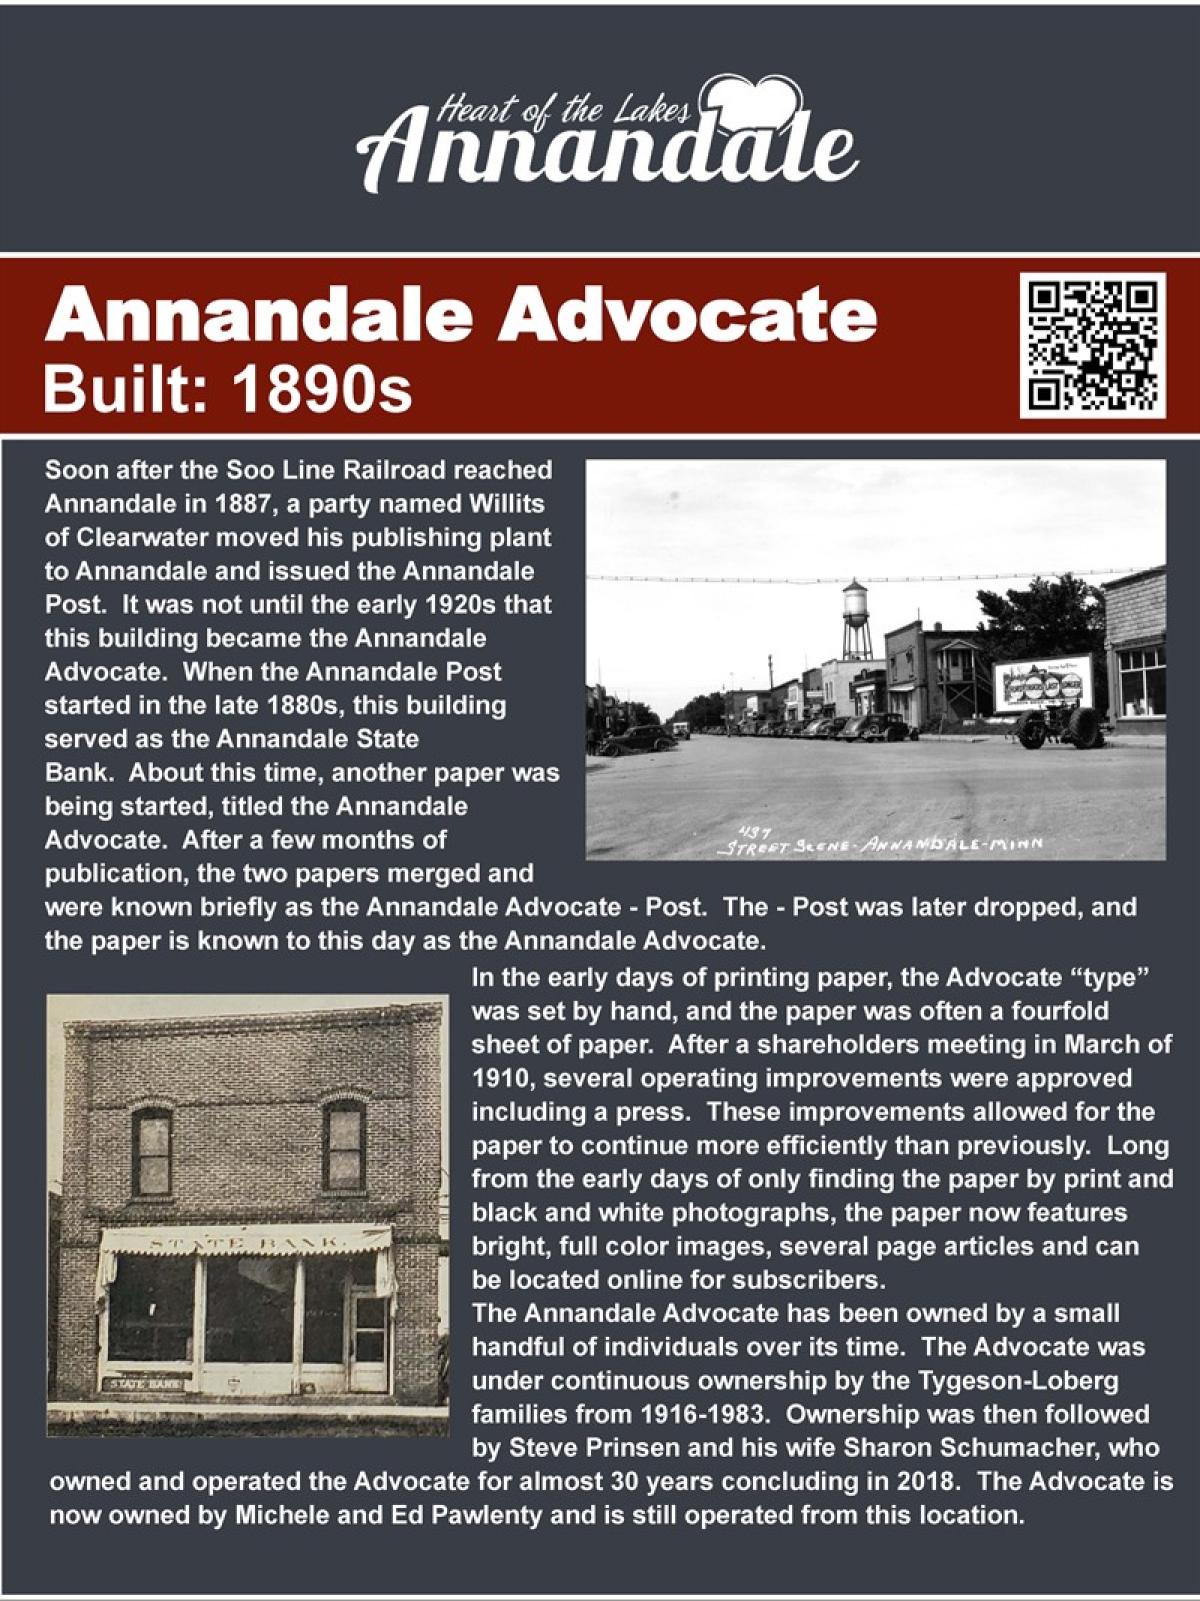 Annandale Advocate walking tour information